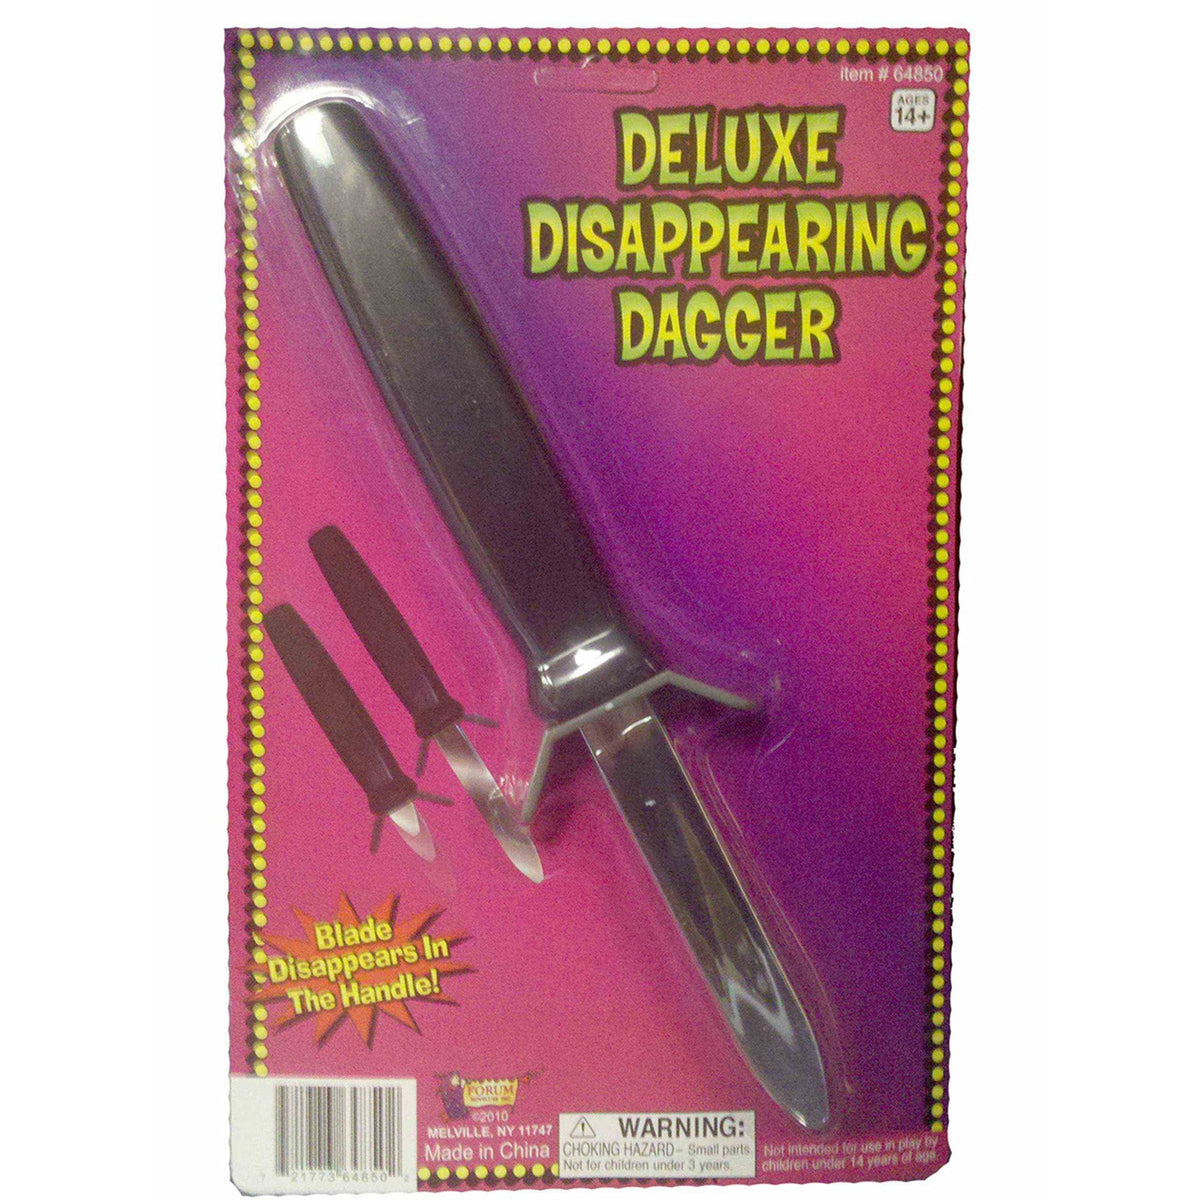 RUBIES II (Ruby Slipper Sales) Costume Accessories Deluxe Disappearing Knife 721773648502